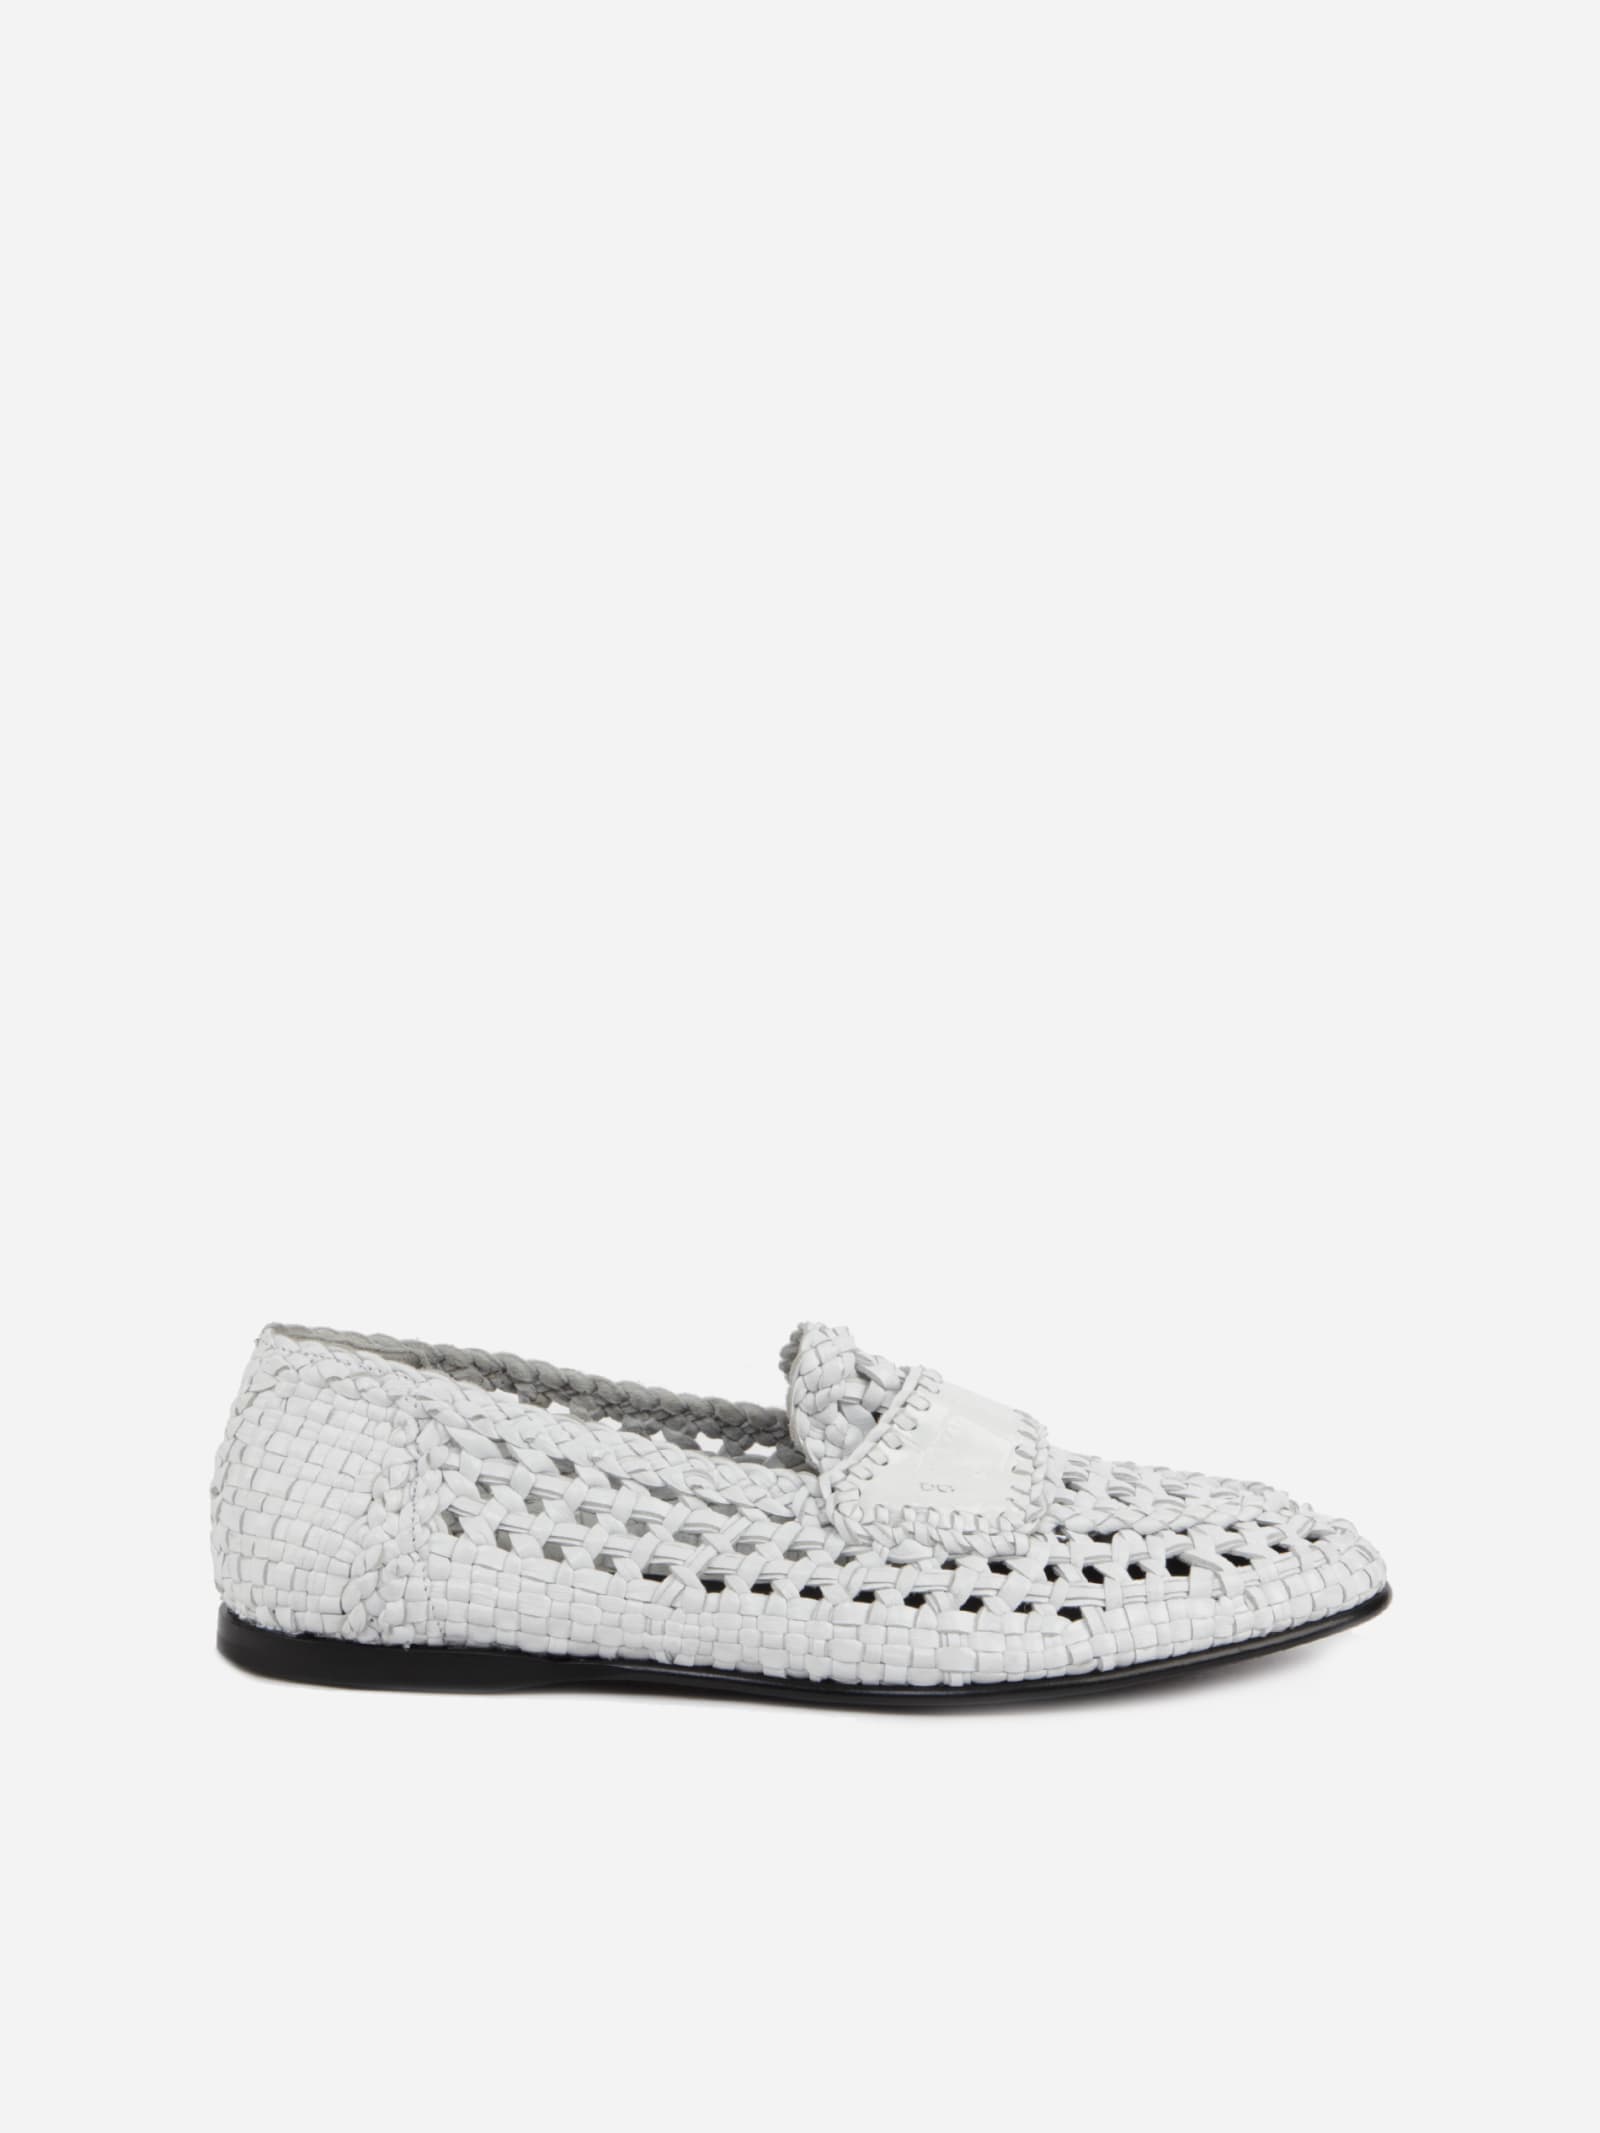 Dolce & Gabbana Slip-ons Made Of Leather With A Woven Pattern